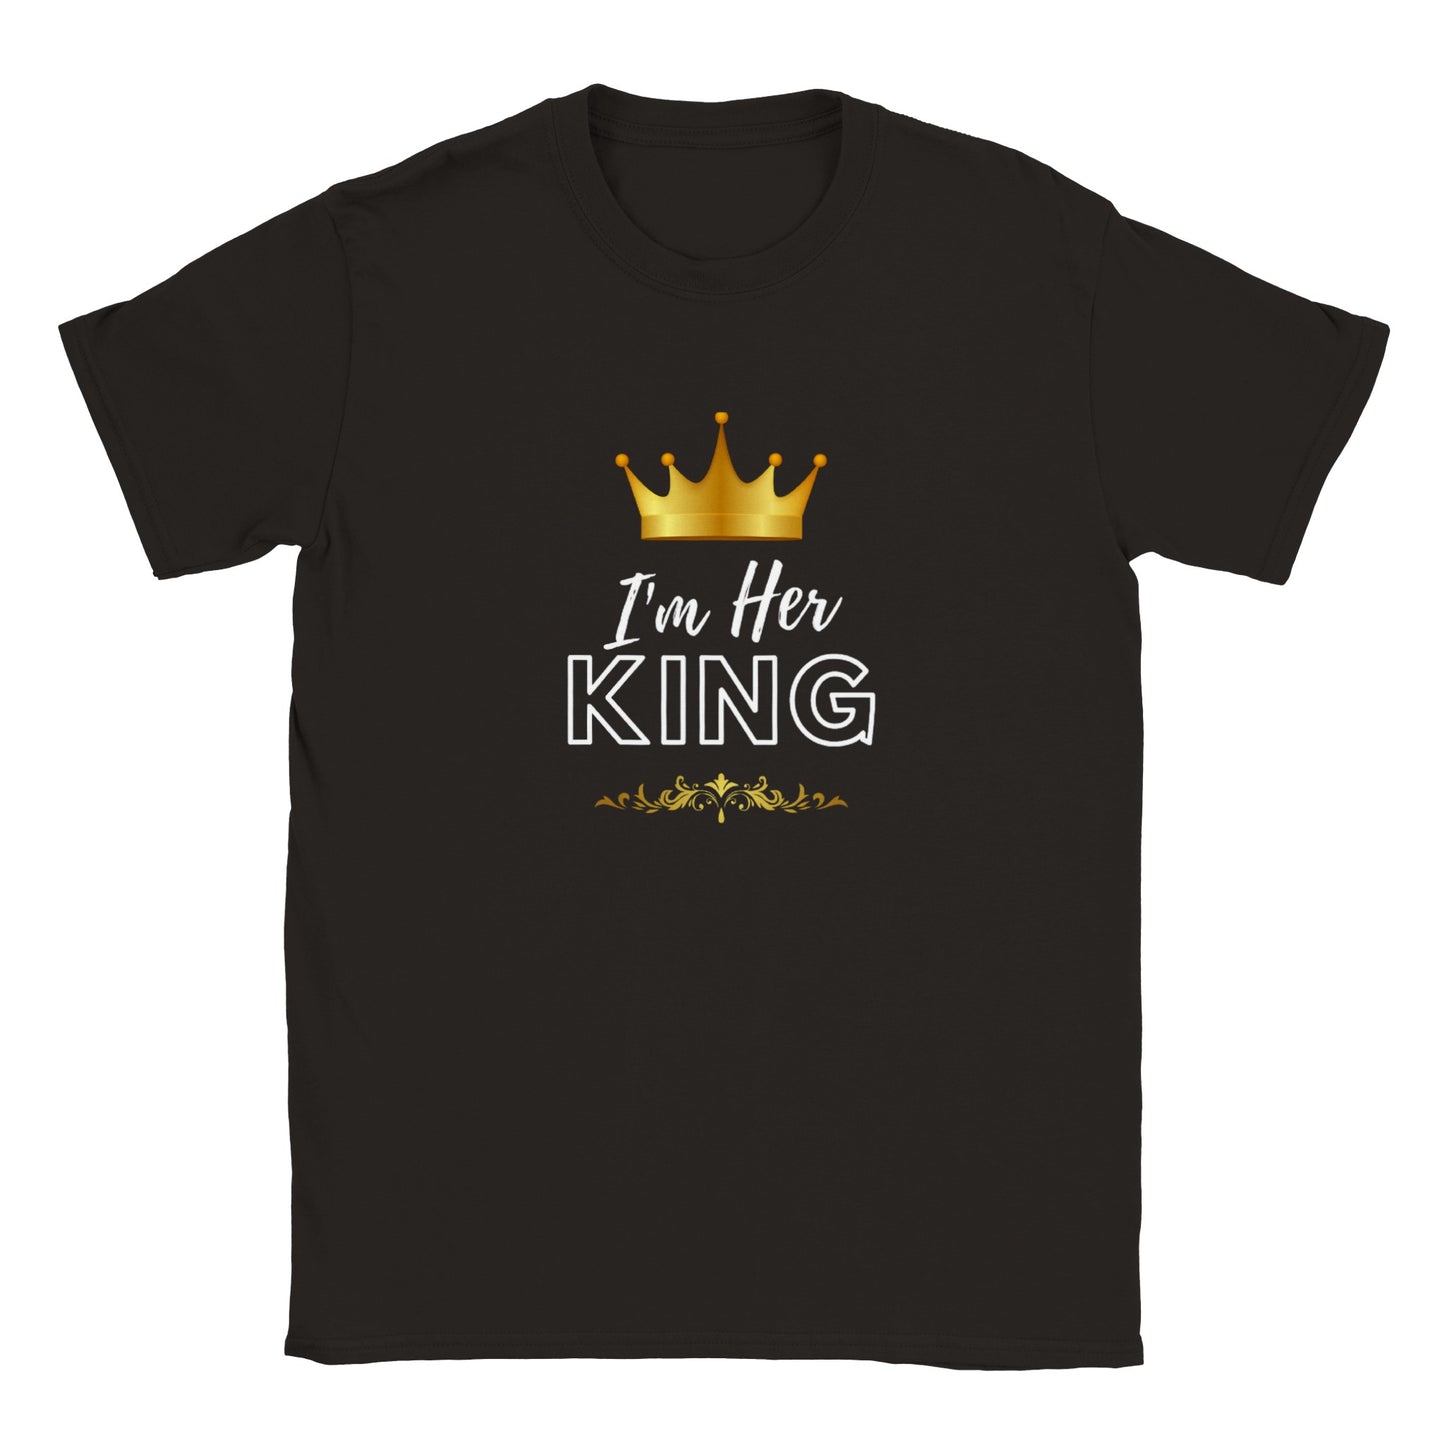 I'm Her King T-shirt